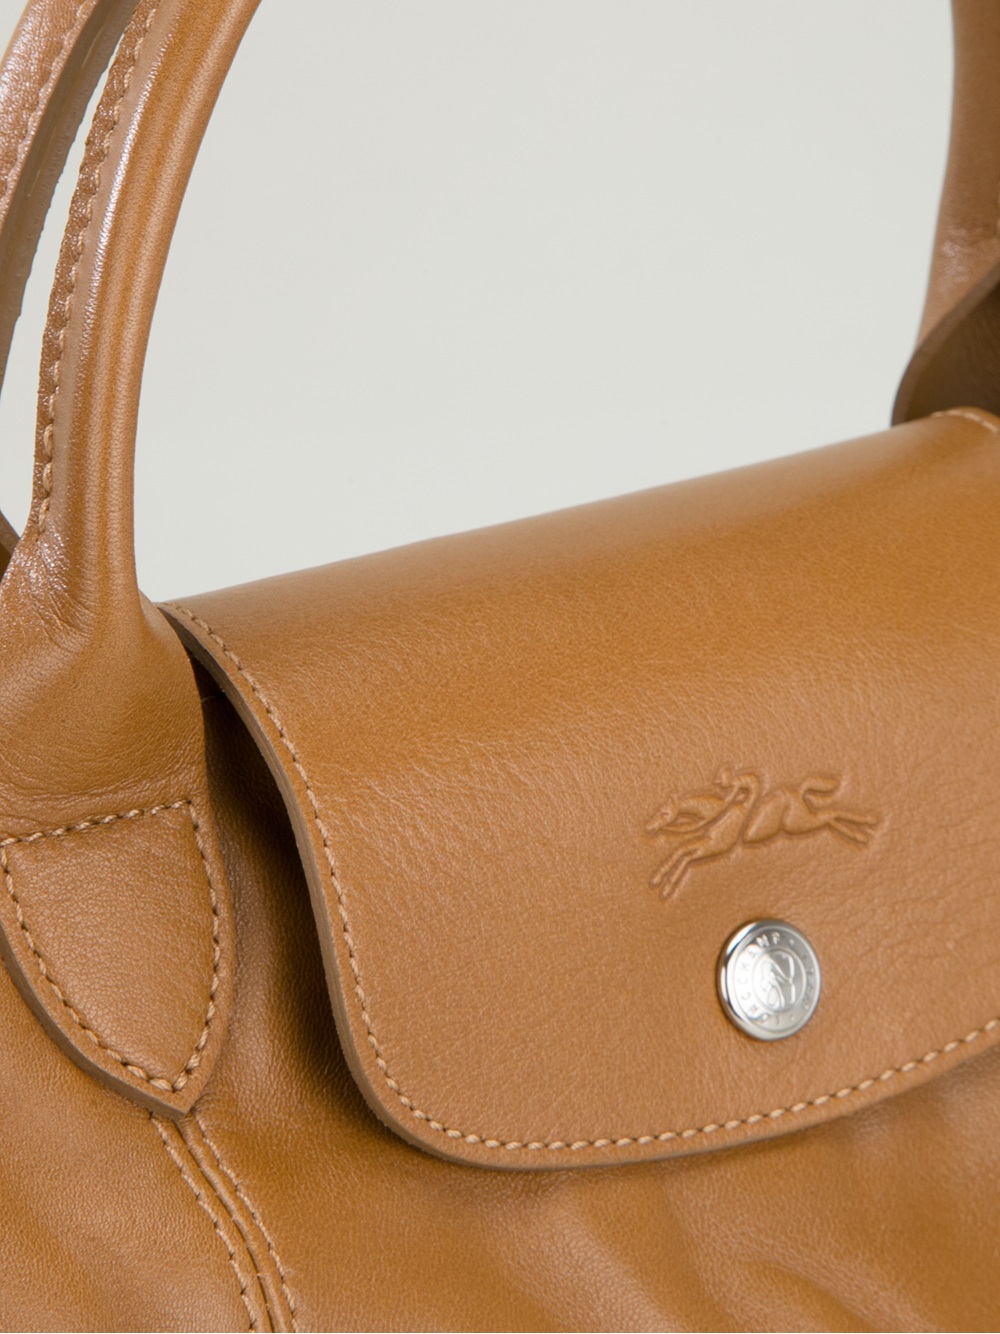 Longchamp Le Pliage Cuir Tote in Brown | Lyst